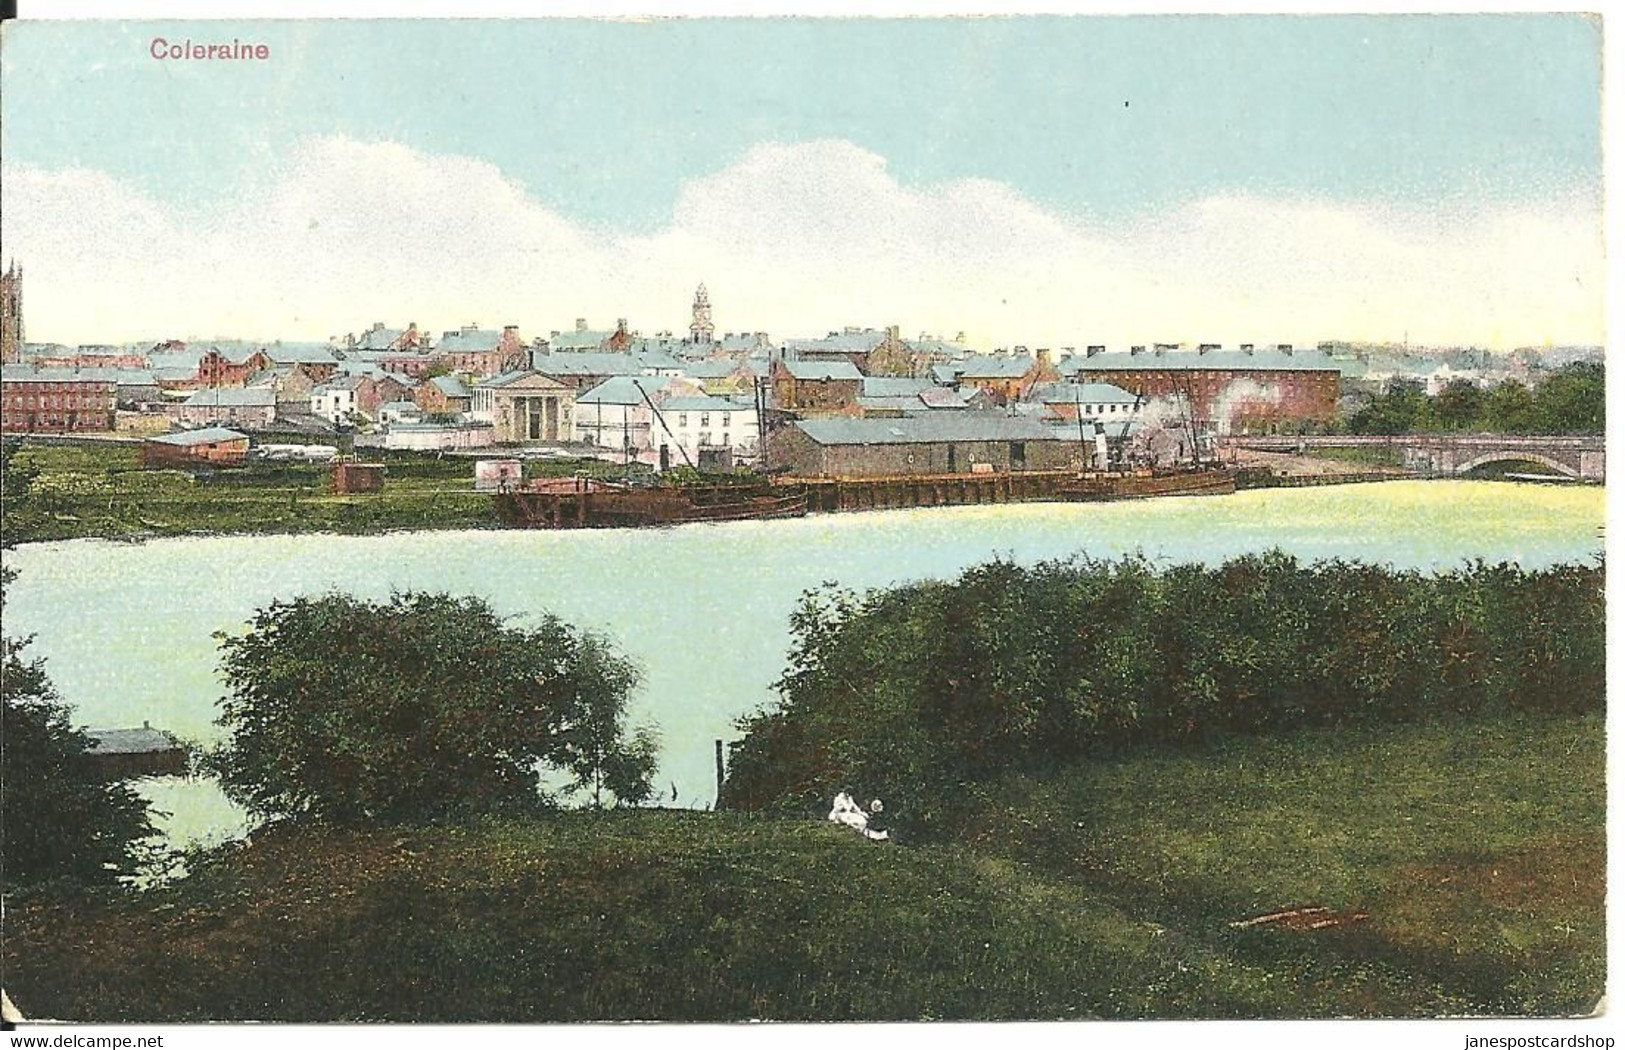 COLOURED POSTCARD OF COLERAINE - TOWN - BRIDGE - BOATS - COUNTY LONDONDERRY - Londonderry